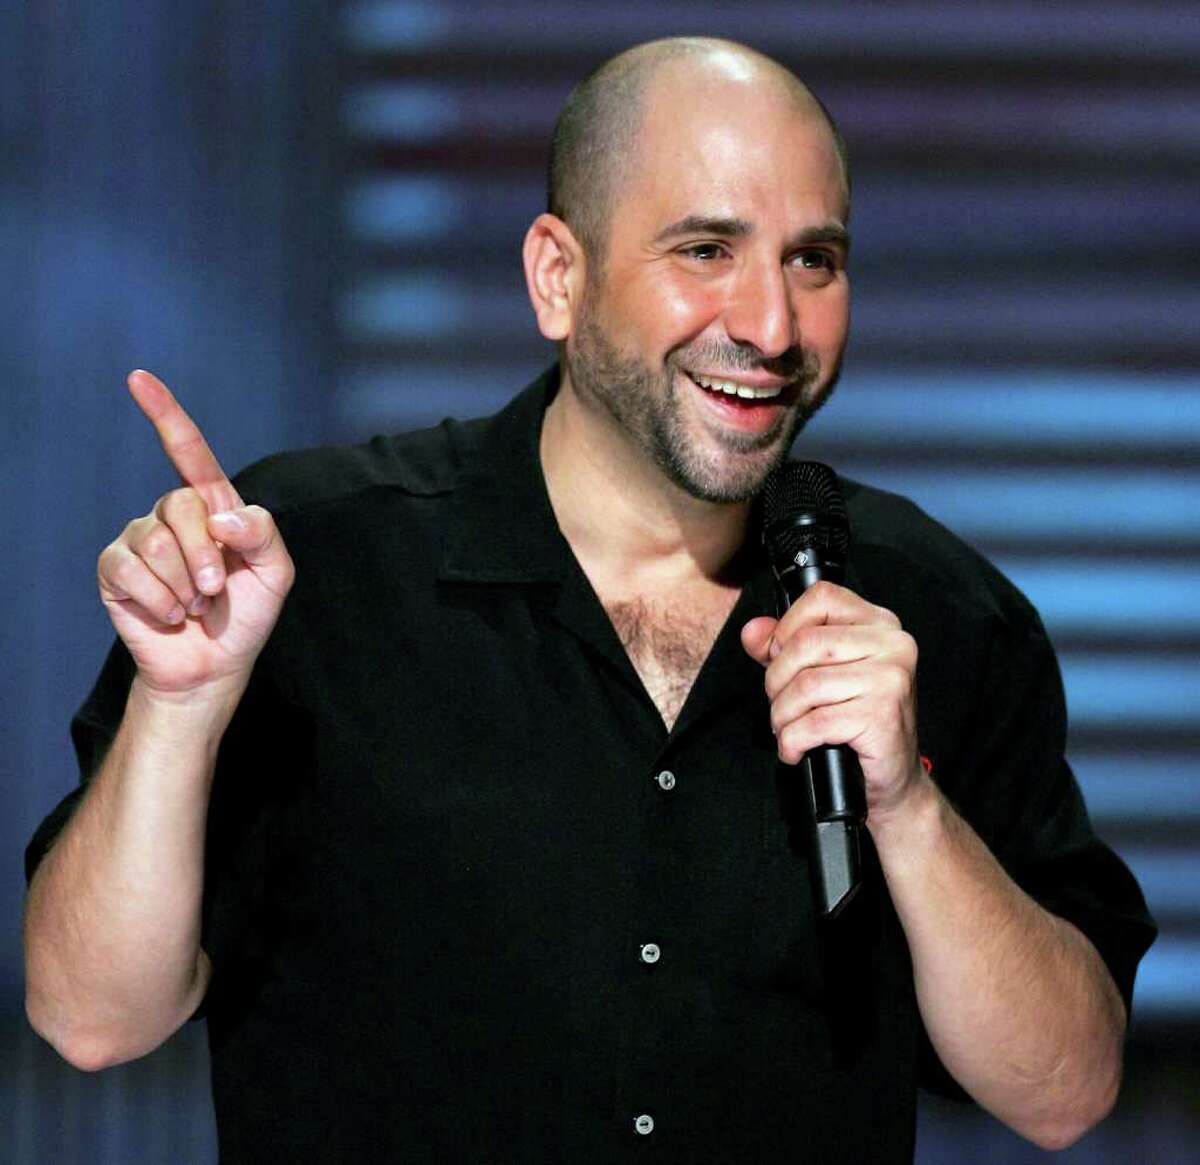 LAS VEGAS - JULY 03: Comedian Dave Attell performs at the House of Blues inside the Mandalay Bay Resort & Casino July 3, 2005 in Las Vegas, Nevada. Comedy Central is shooting the television network's first original stand-up film, "Dave Attell's Insomniac Tour." (Photo by Ethan Miller/Getty Images for Comedy Central) *** Local Caption *** Dave Attell